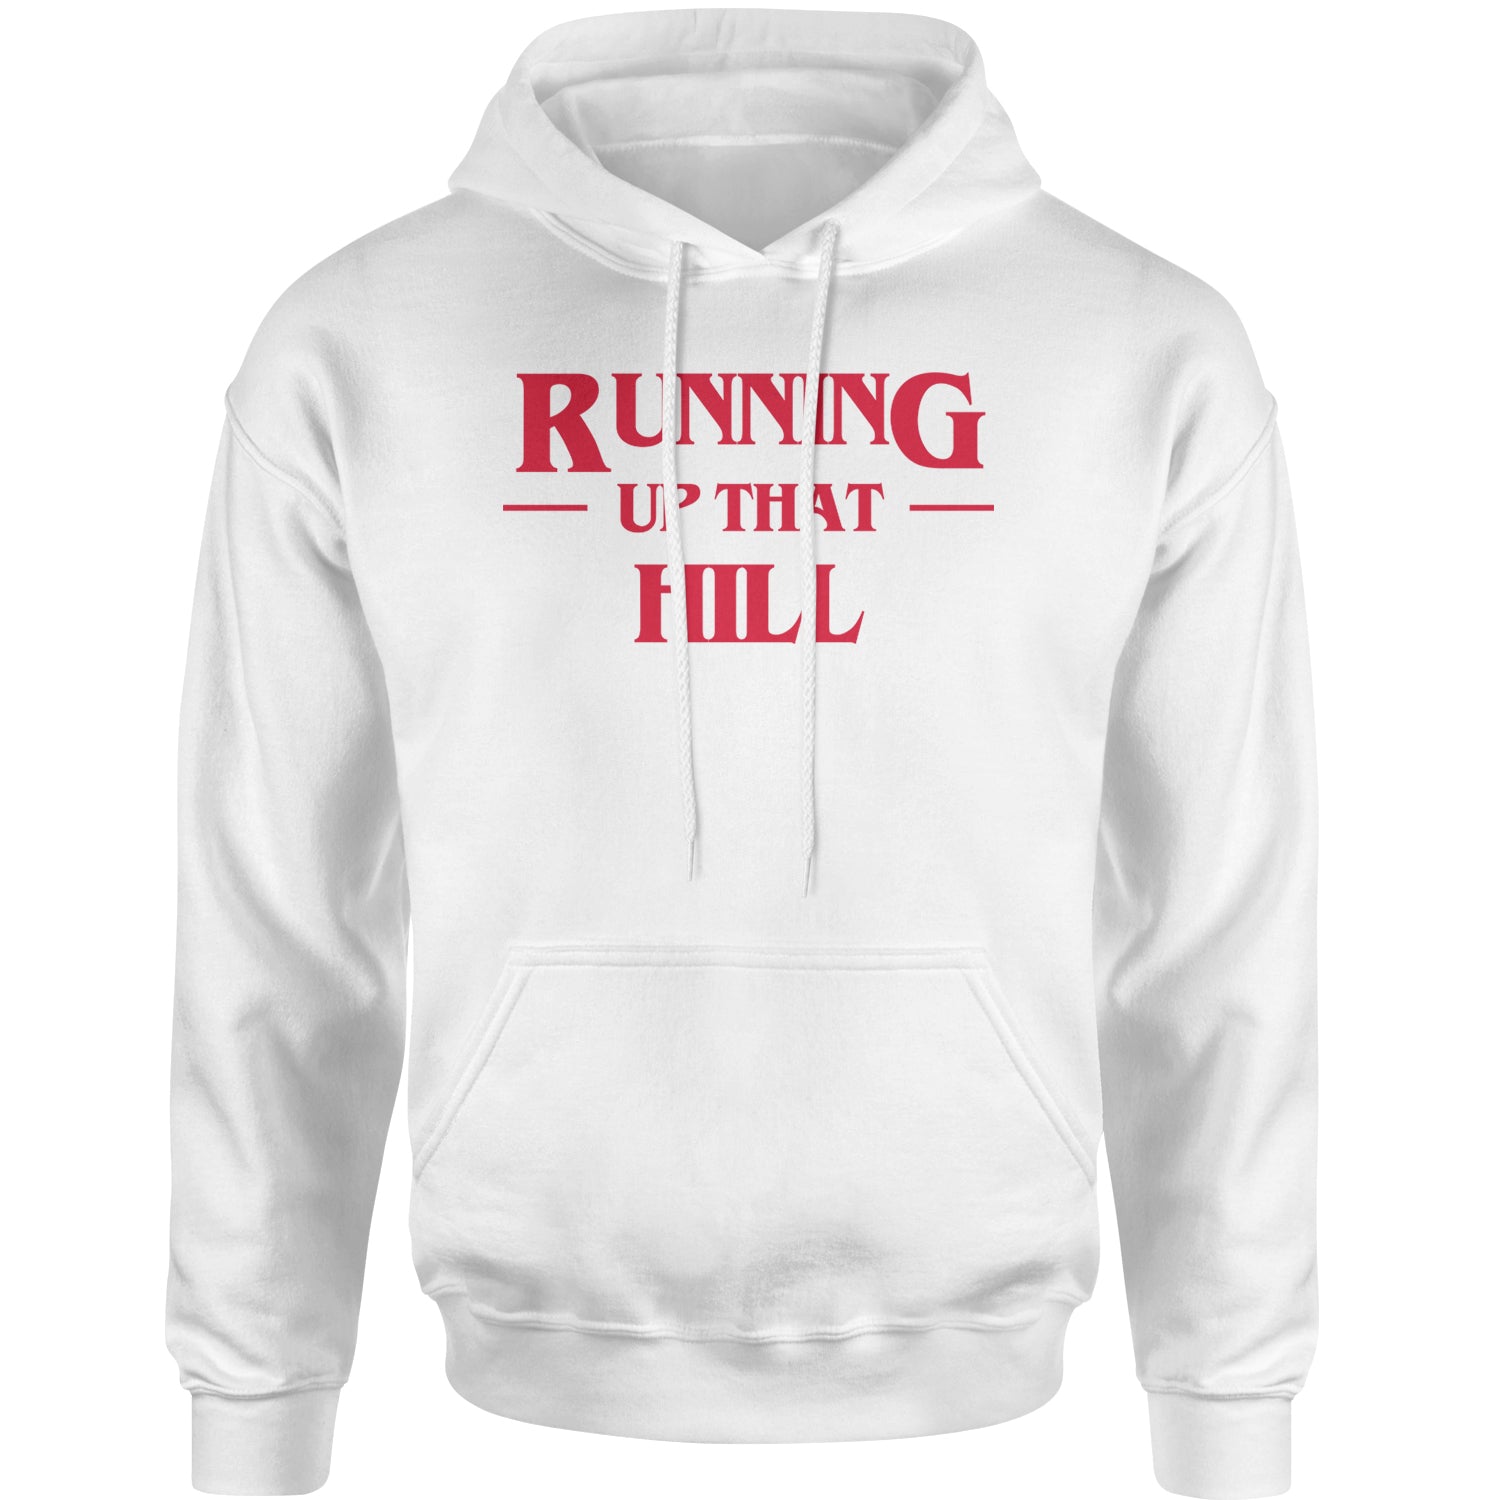 Running Up That Hill Adult Hoodie Sweatshirt 4, don’t, eleven, four, friends, lie, season by Expression Tees